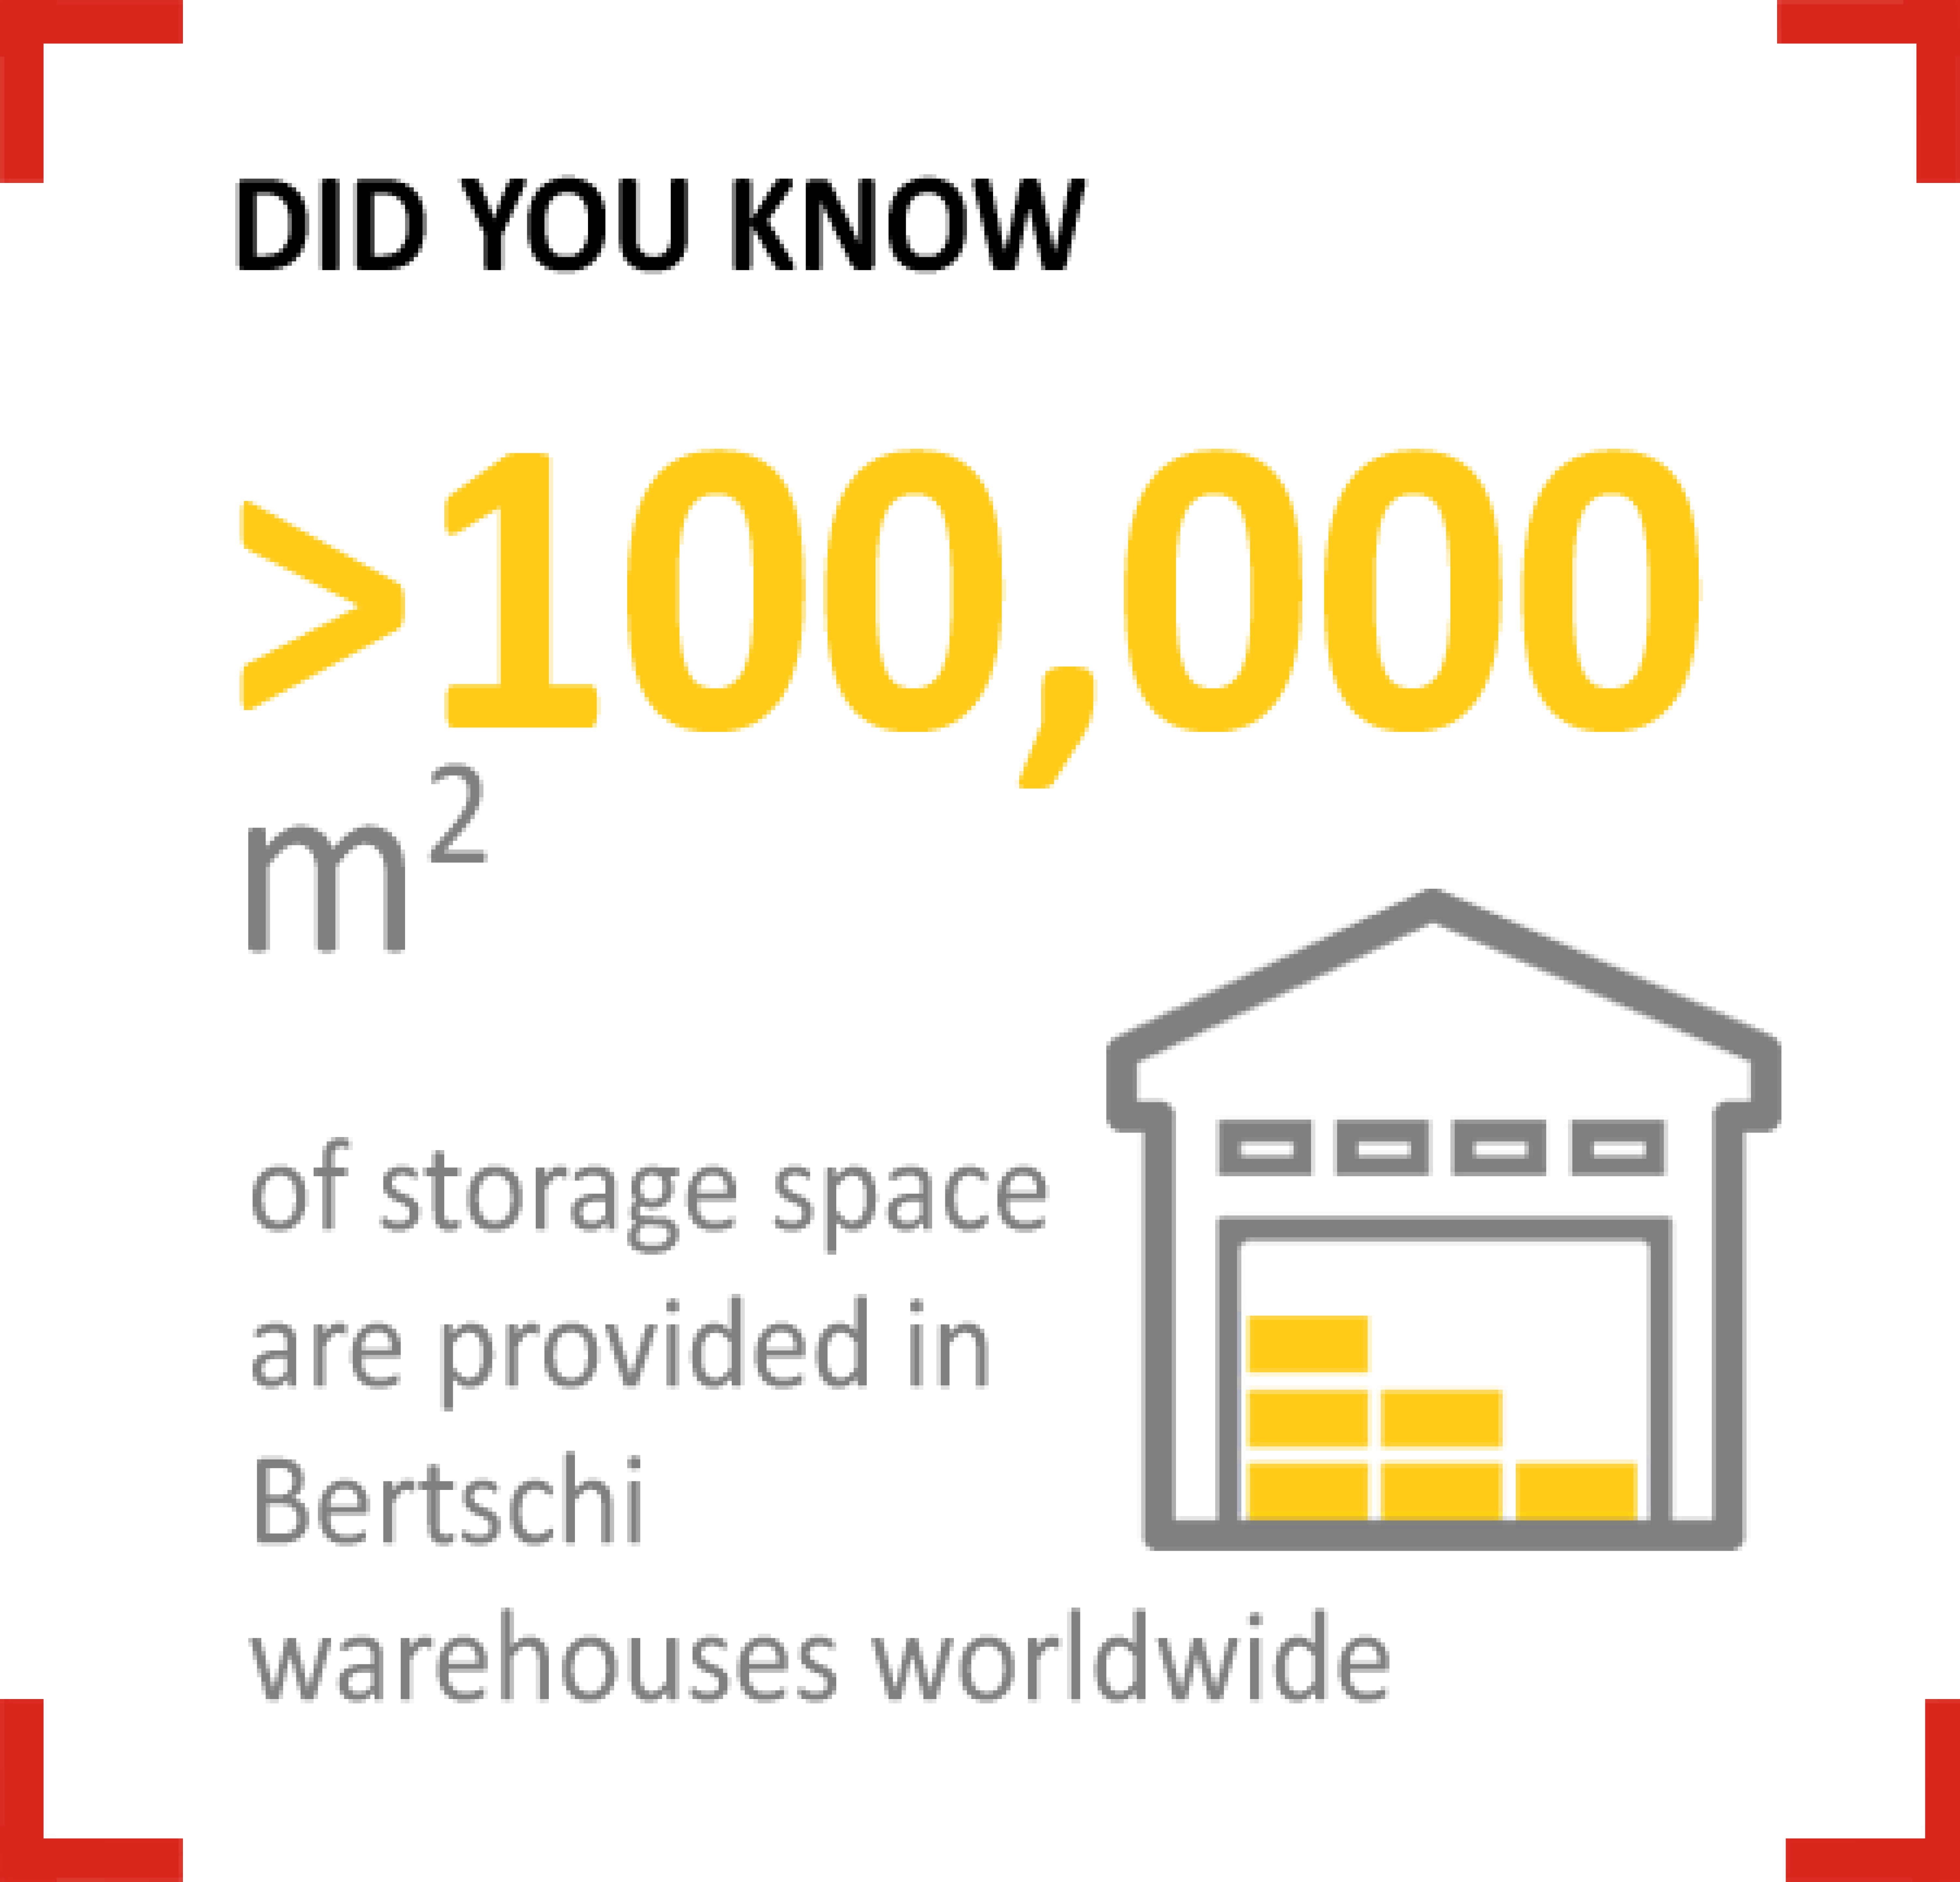 A figure of the more than 100'000 meters squared storage space provded by Bertschi warehouses worldwide.